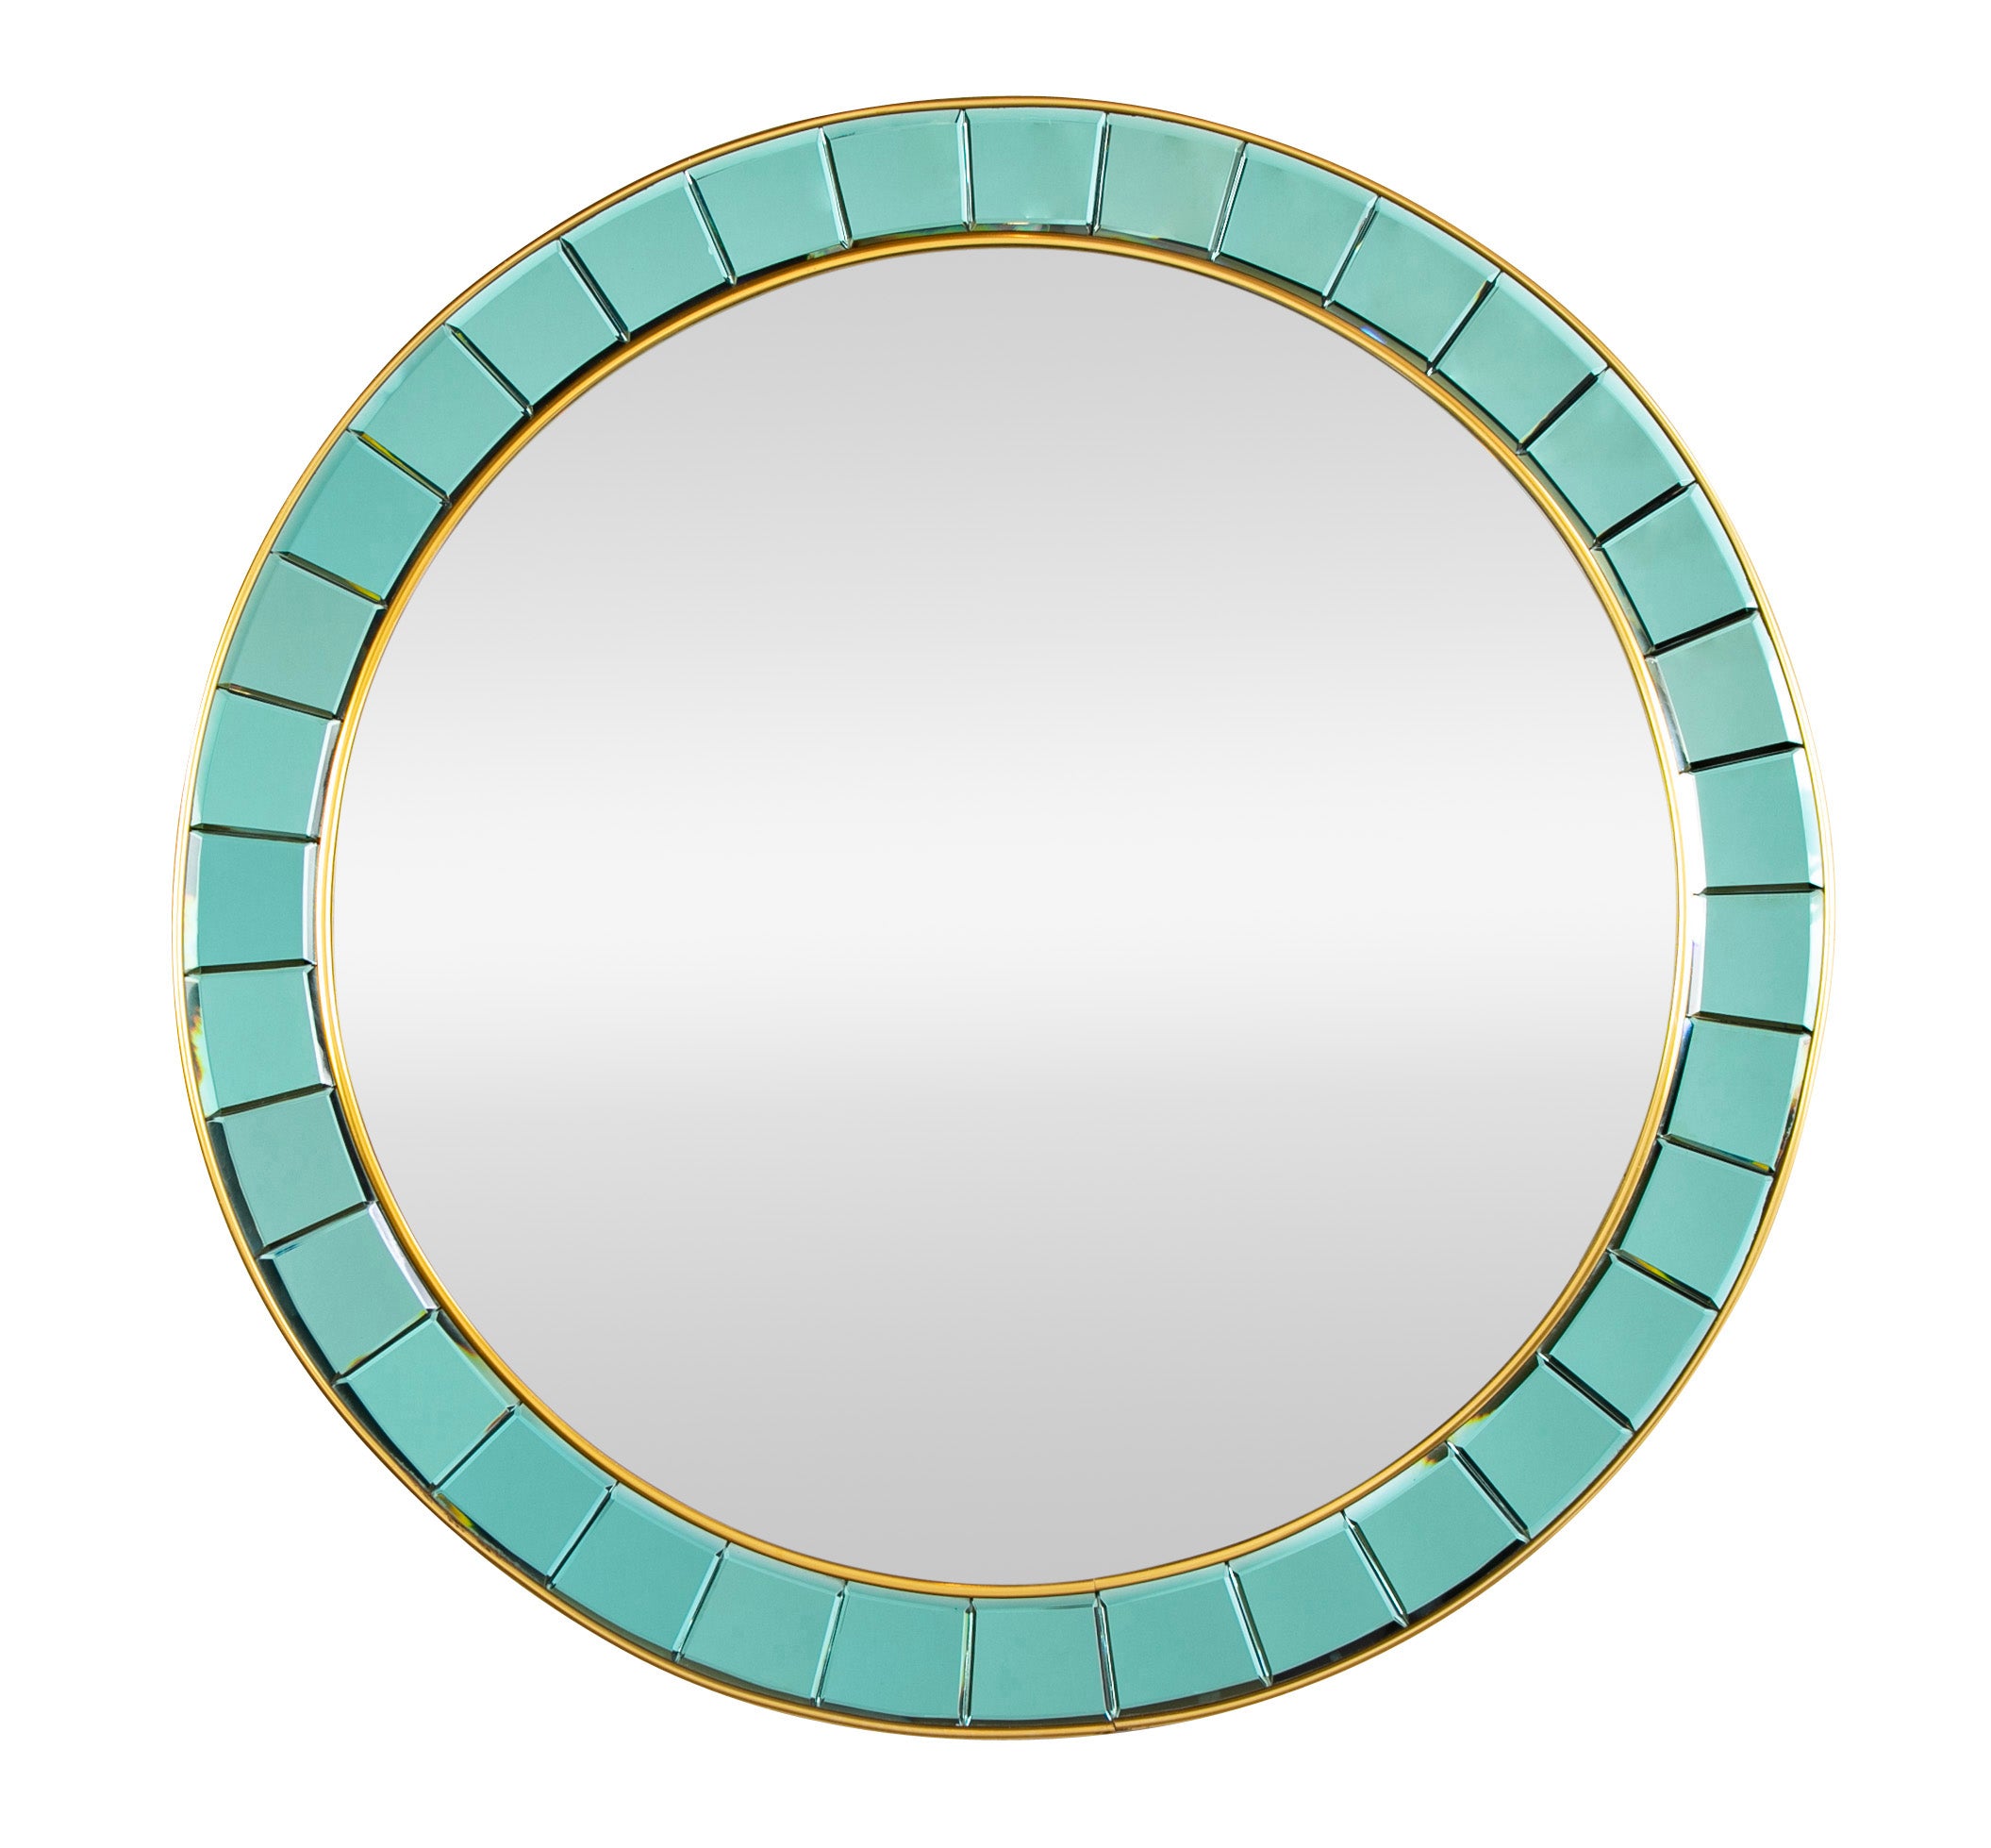 Italian Cristal Arte Round Mirror with Colored Glass and Brass Edges